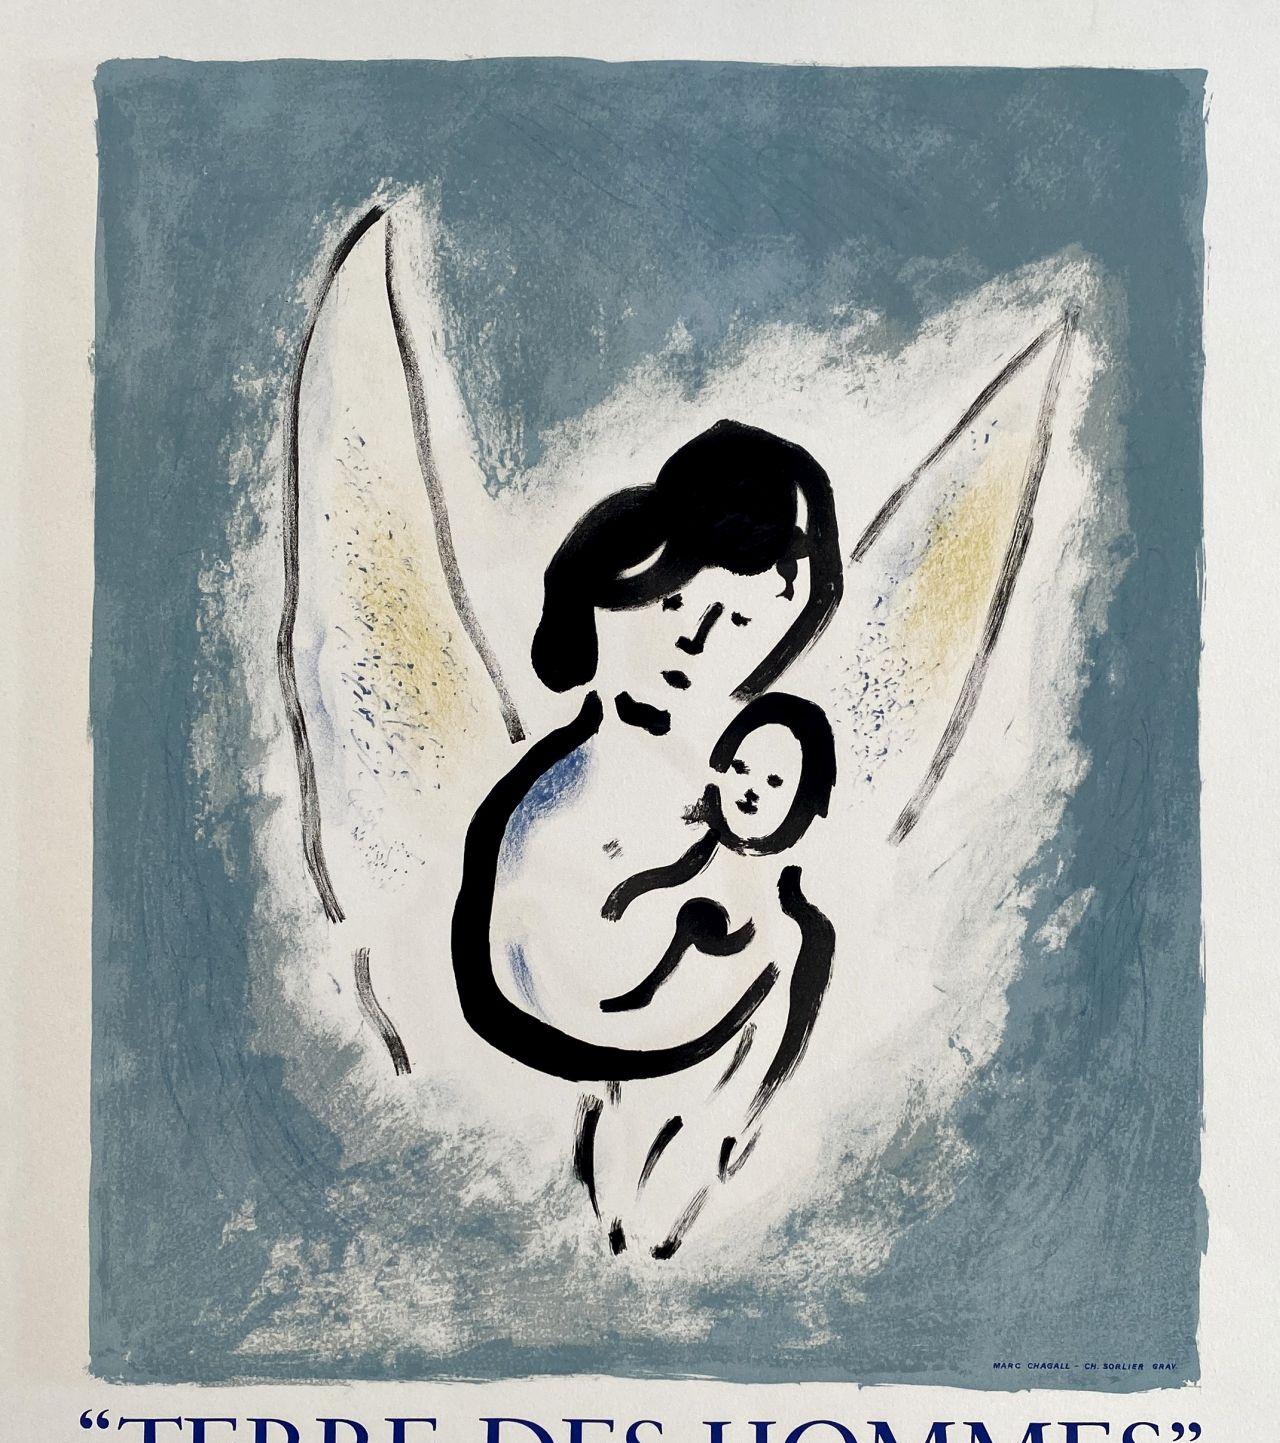 Angel and Child - Lithograph Hand Signed & Numbered /100 - Terre des hommes - Print by Marc Chagall